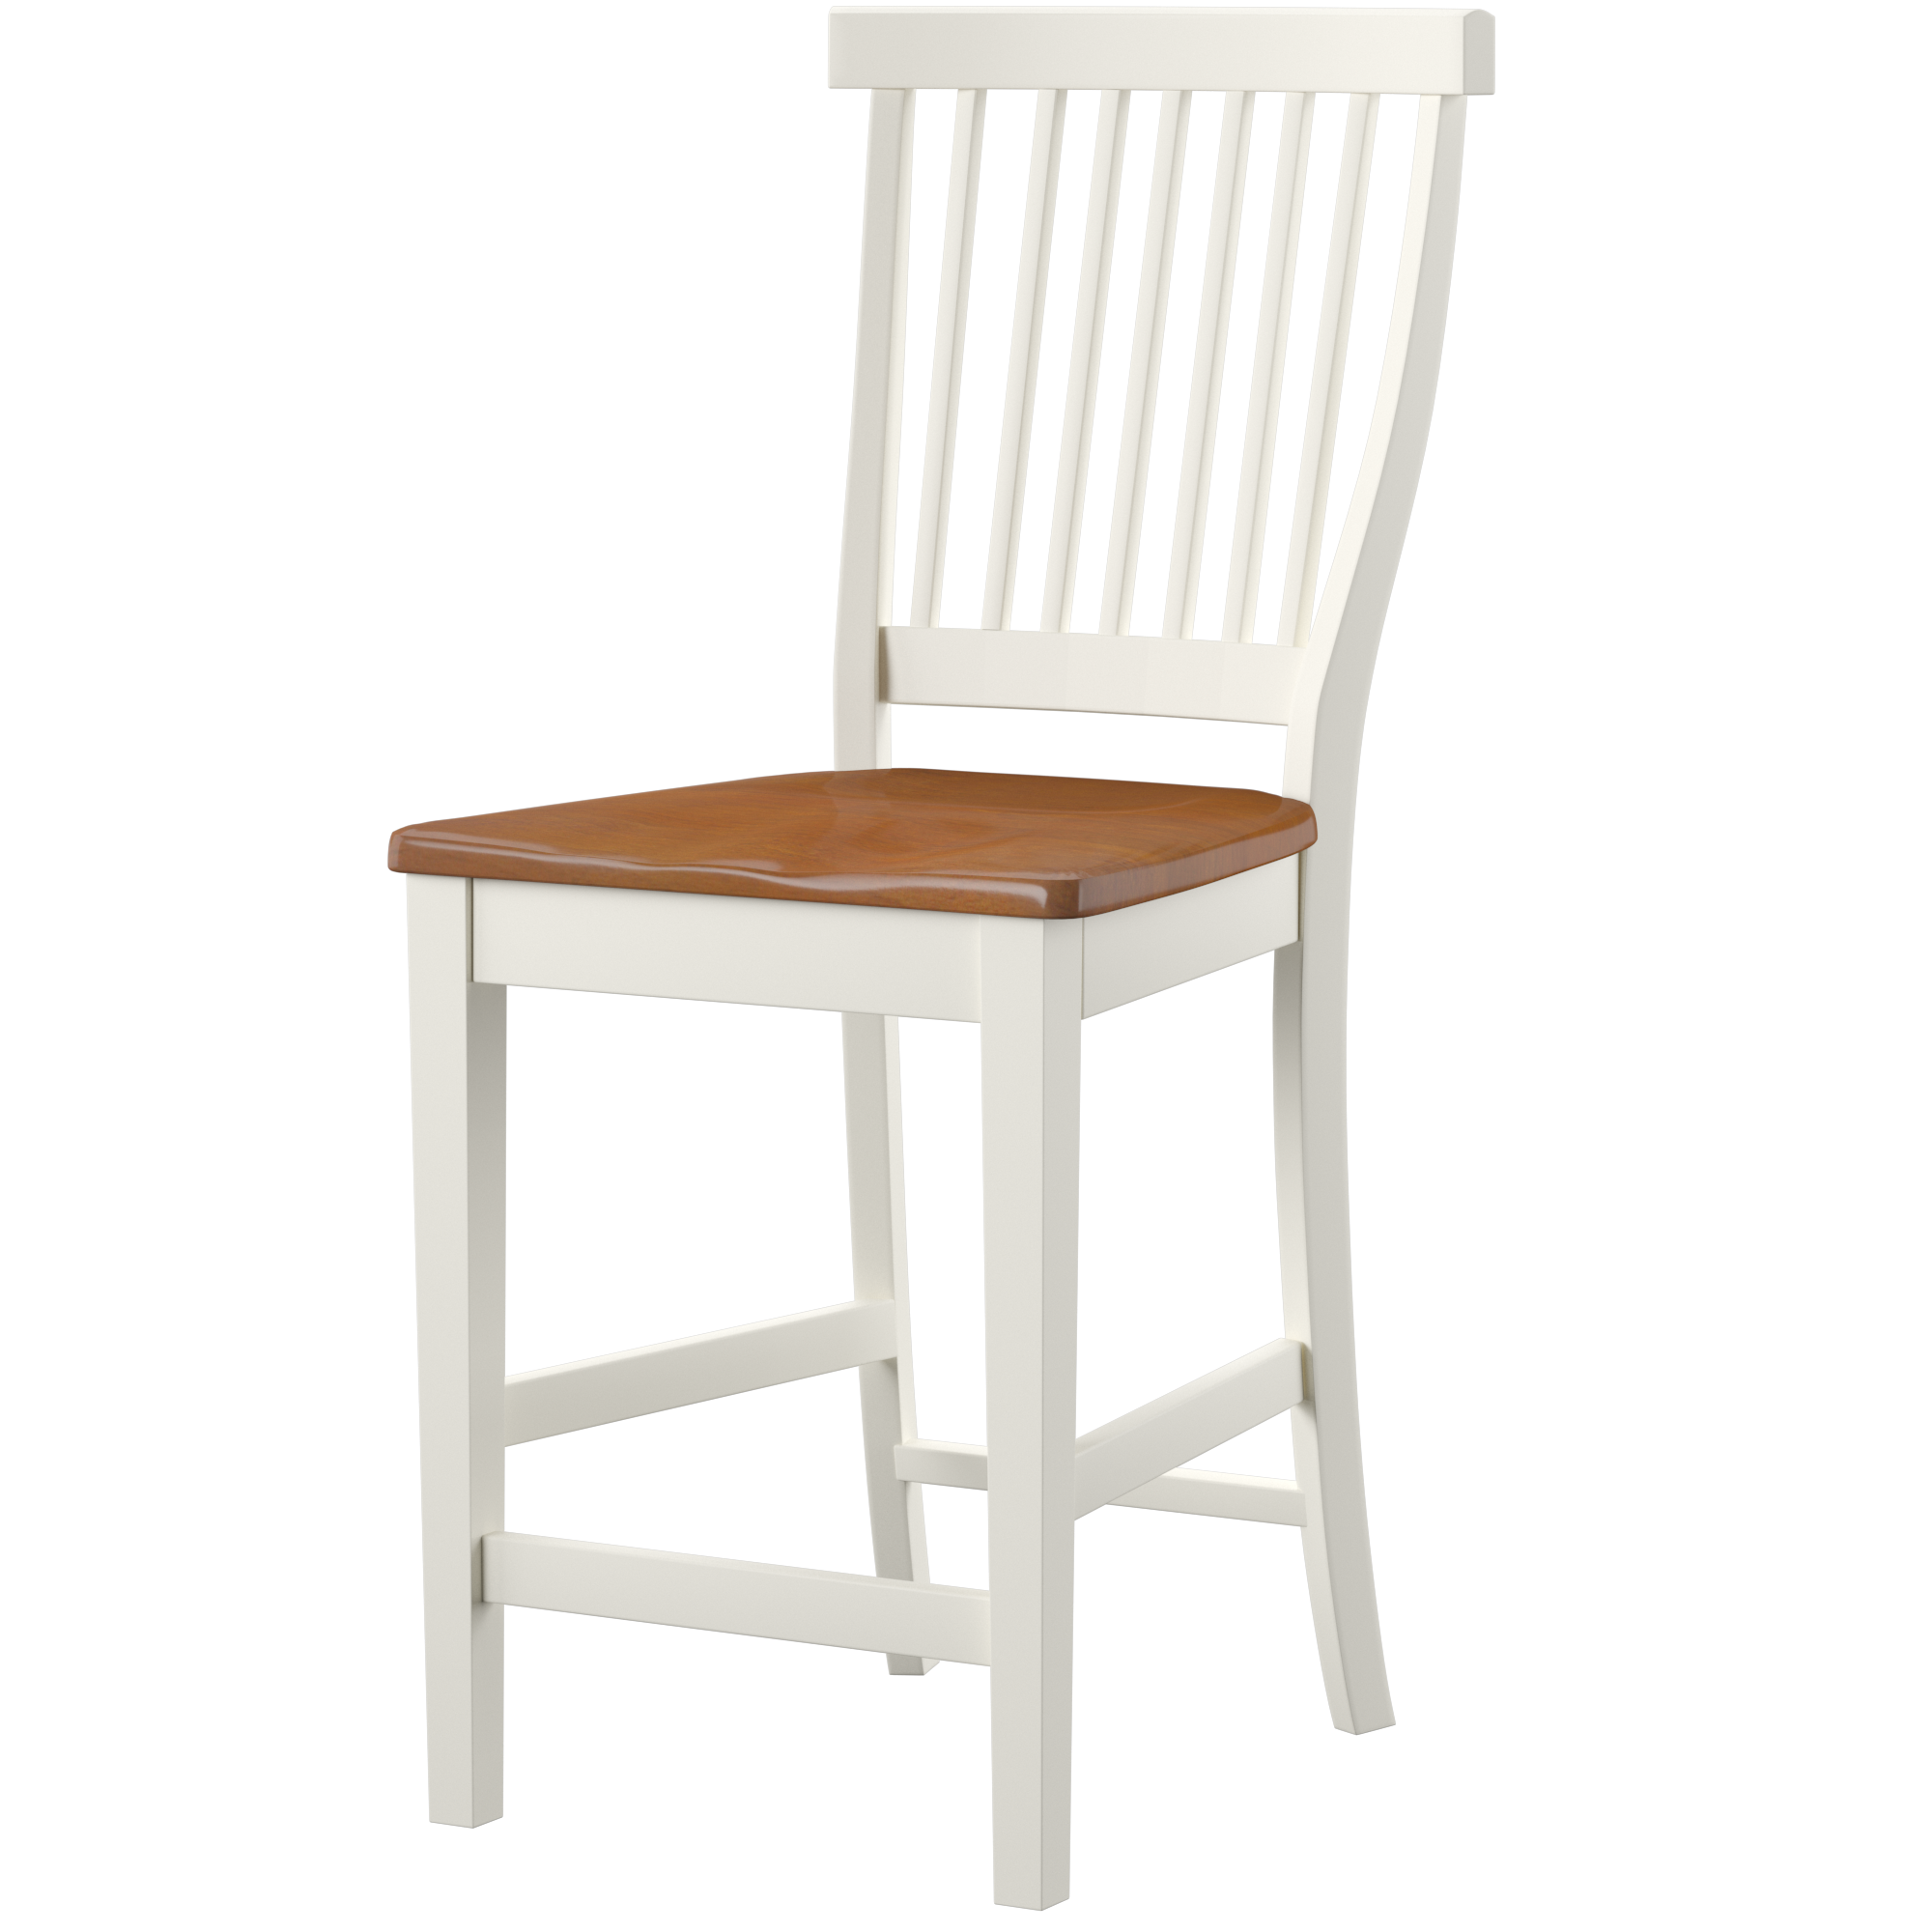 Homestyles Americana Traditional Wood Counter Stool in Antique White and Oak - image 3 of 9